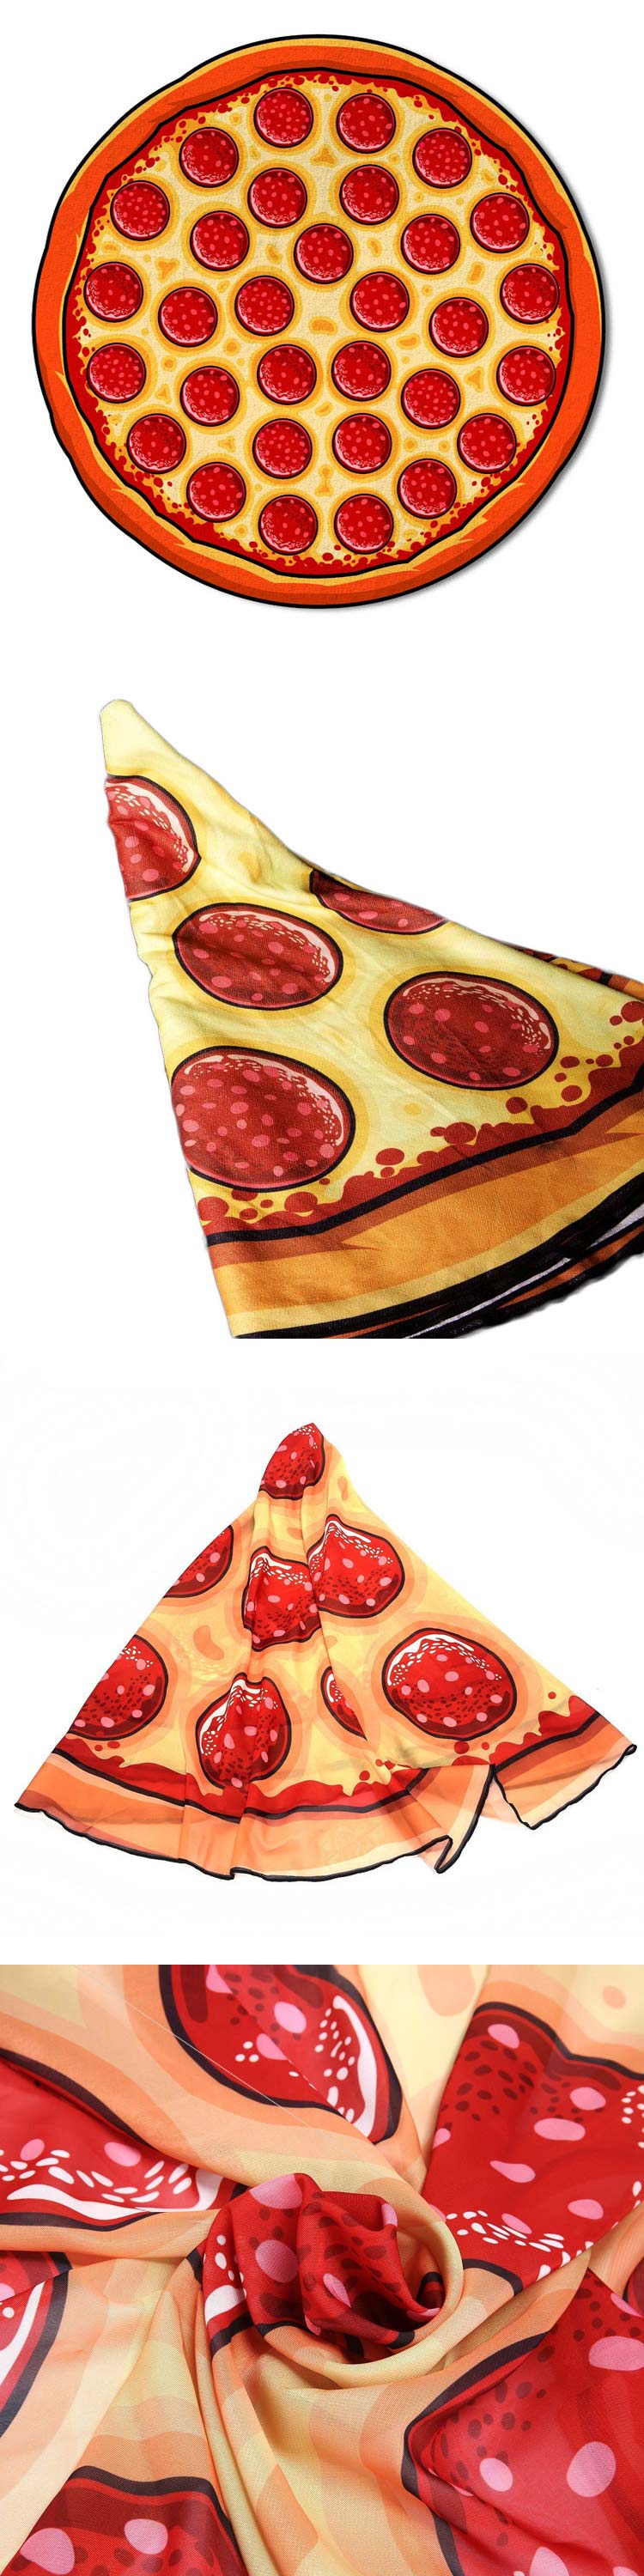 150cm-Donut-Pizza-Pineaaple-Printing-Thin-Dacron-Beach-Towel-Shawl-Bed-Sheet-Tapestry-1067092-9